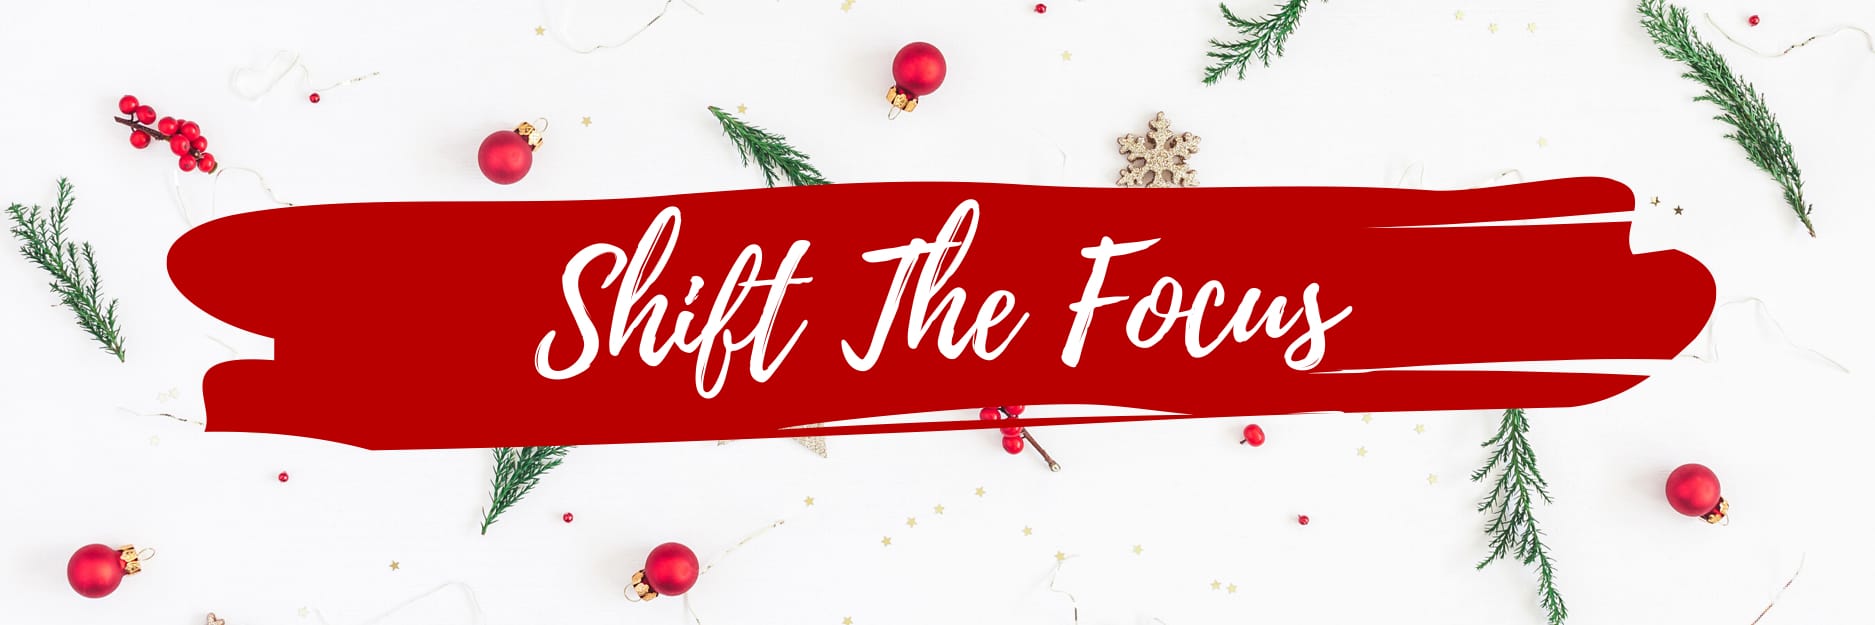 Light background with tree ornaments and text overlay "Shift The Focus."